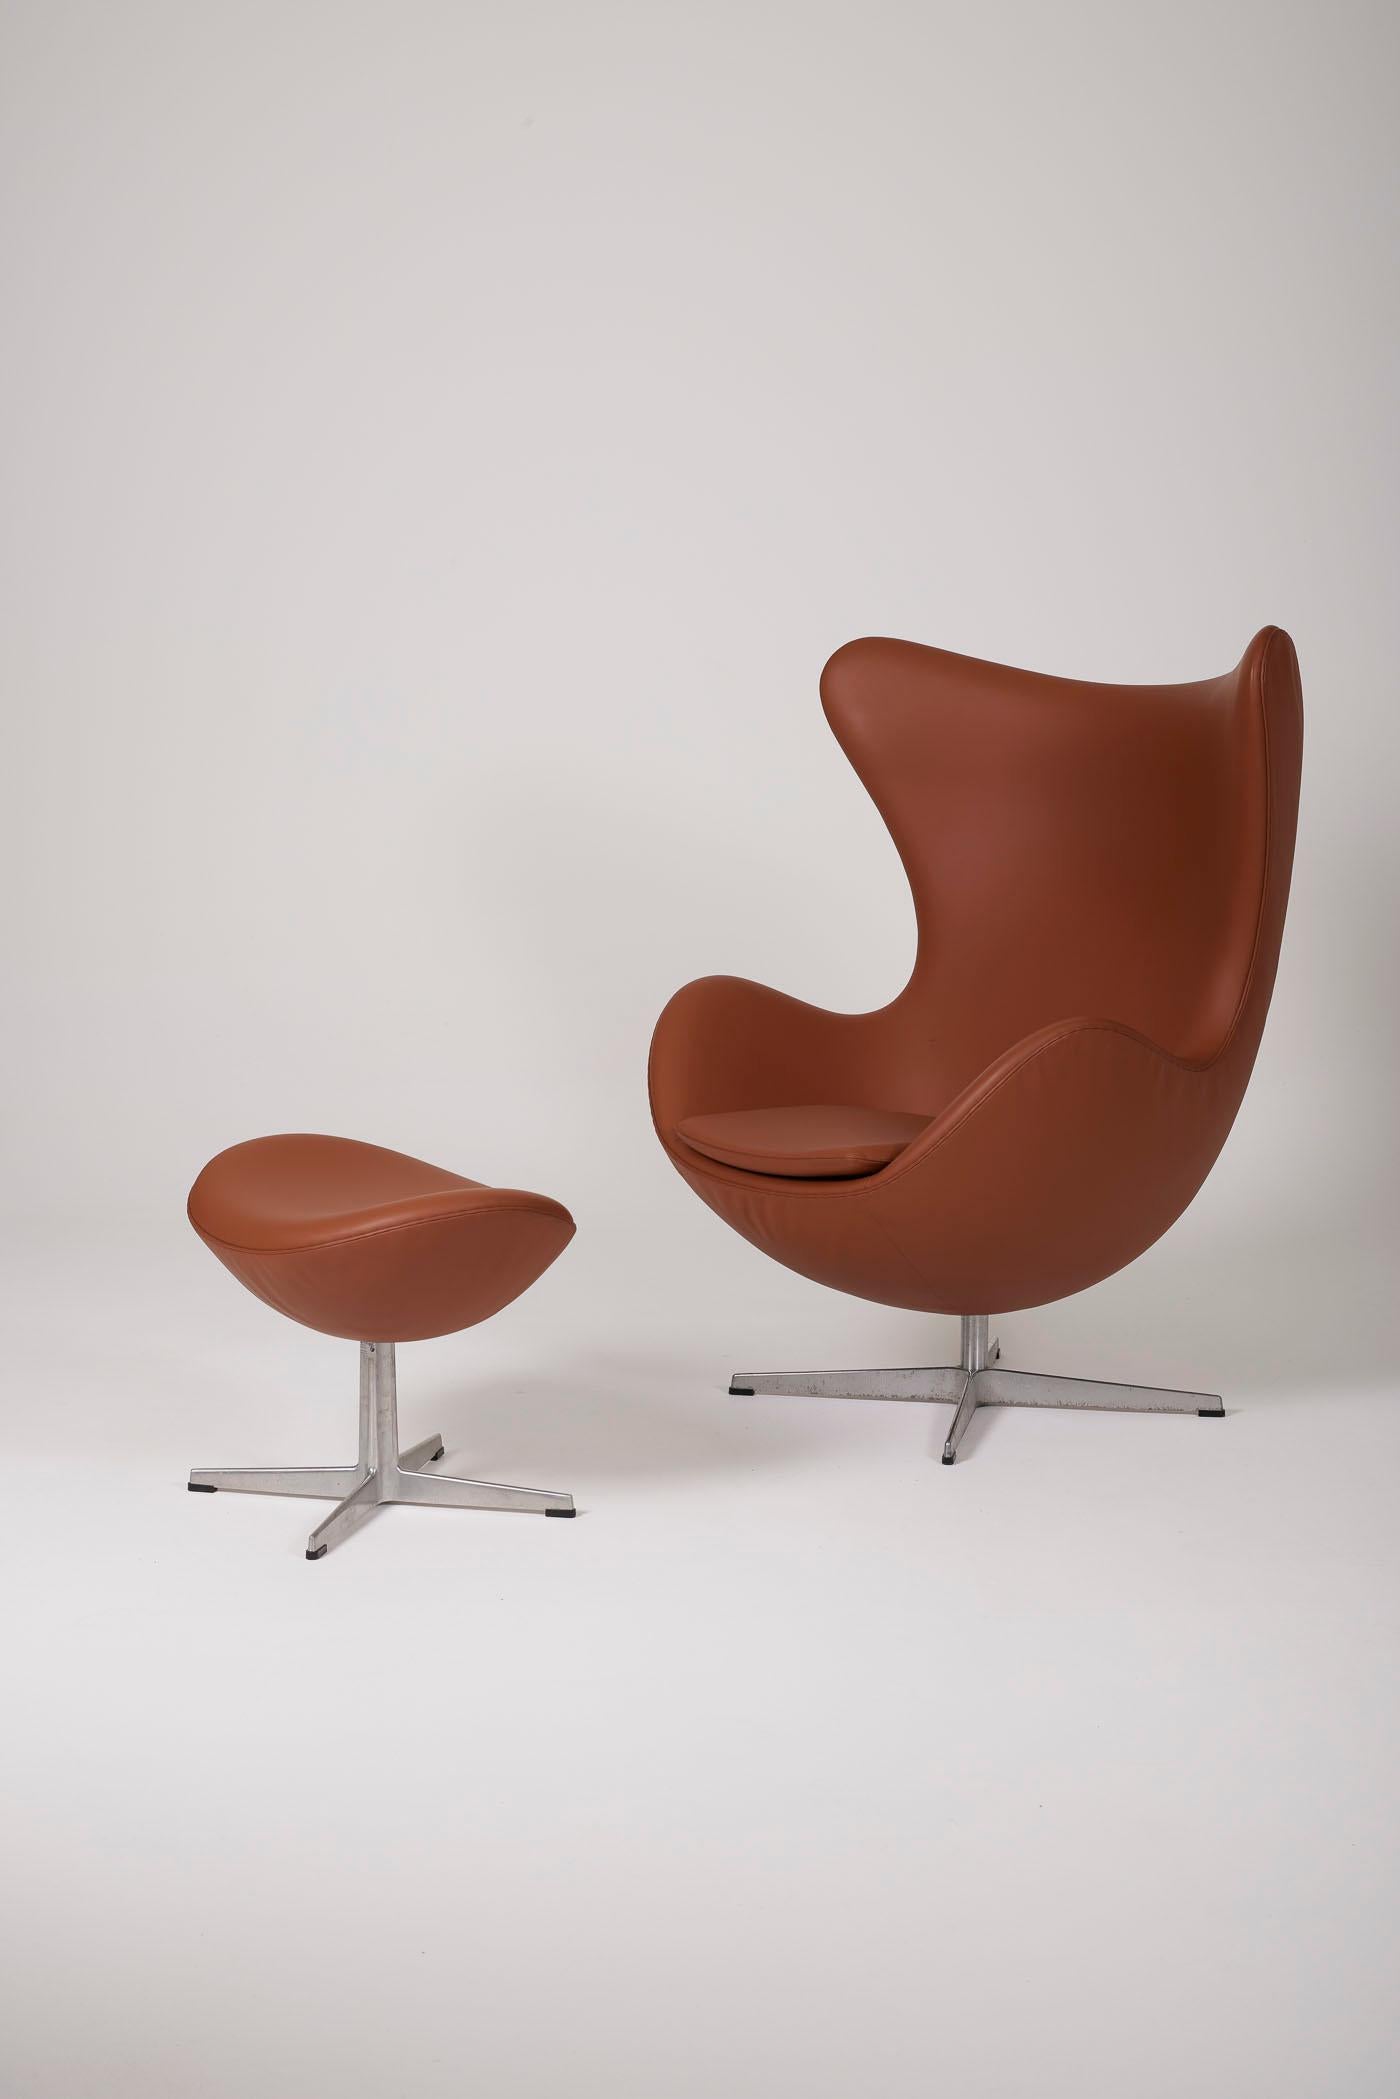 Egg chair and its ottoman by the Scandinavian designer Arne Jacobsen, Fritz Hansen edition. Molded fiberglass shell covered in camel leather. The base is in brushed metal. The chair is swivel. Set in very good condition.
DV447